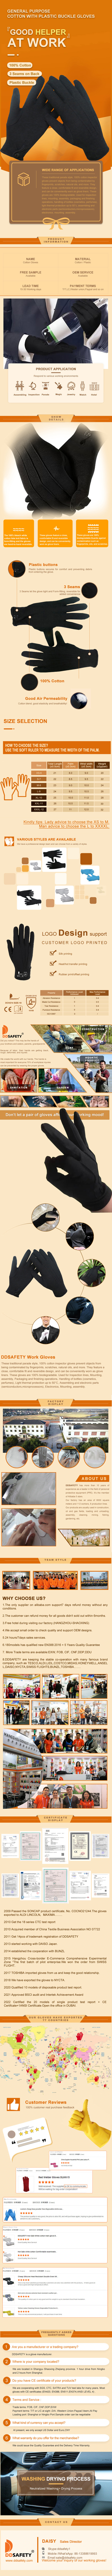 Black Cotton Gloves, 3 Seams on Back, with a Plastic Buckle - DCH214 Black Cotton Gloves, 3 Seams on Back, with a Plastic Buckle - DCH214 cotton gloves,Black Cotton Gloves